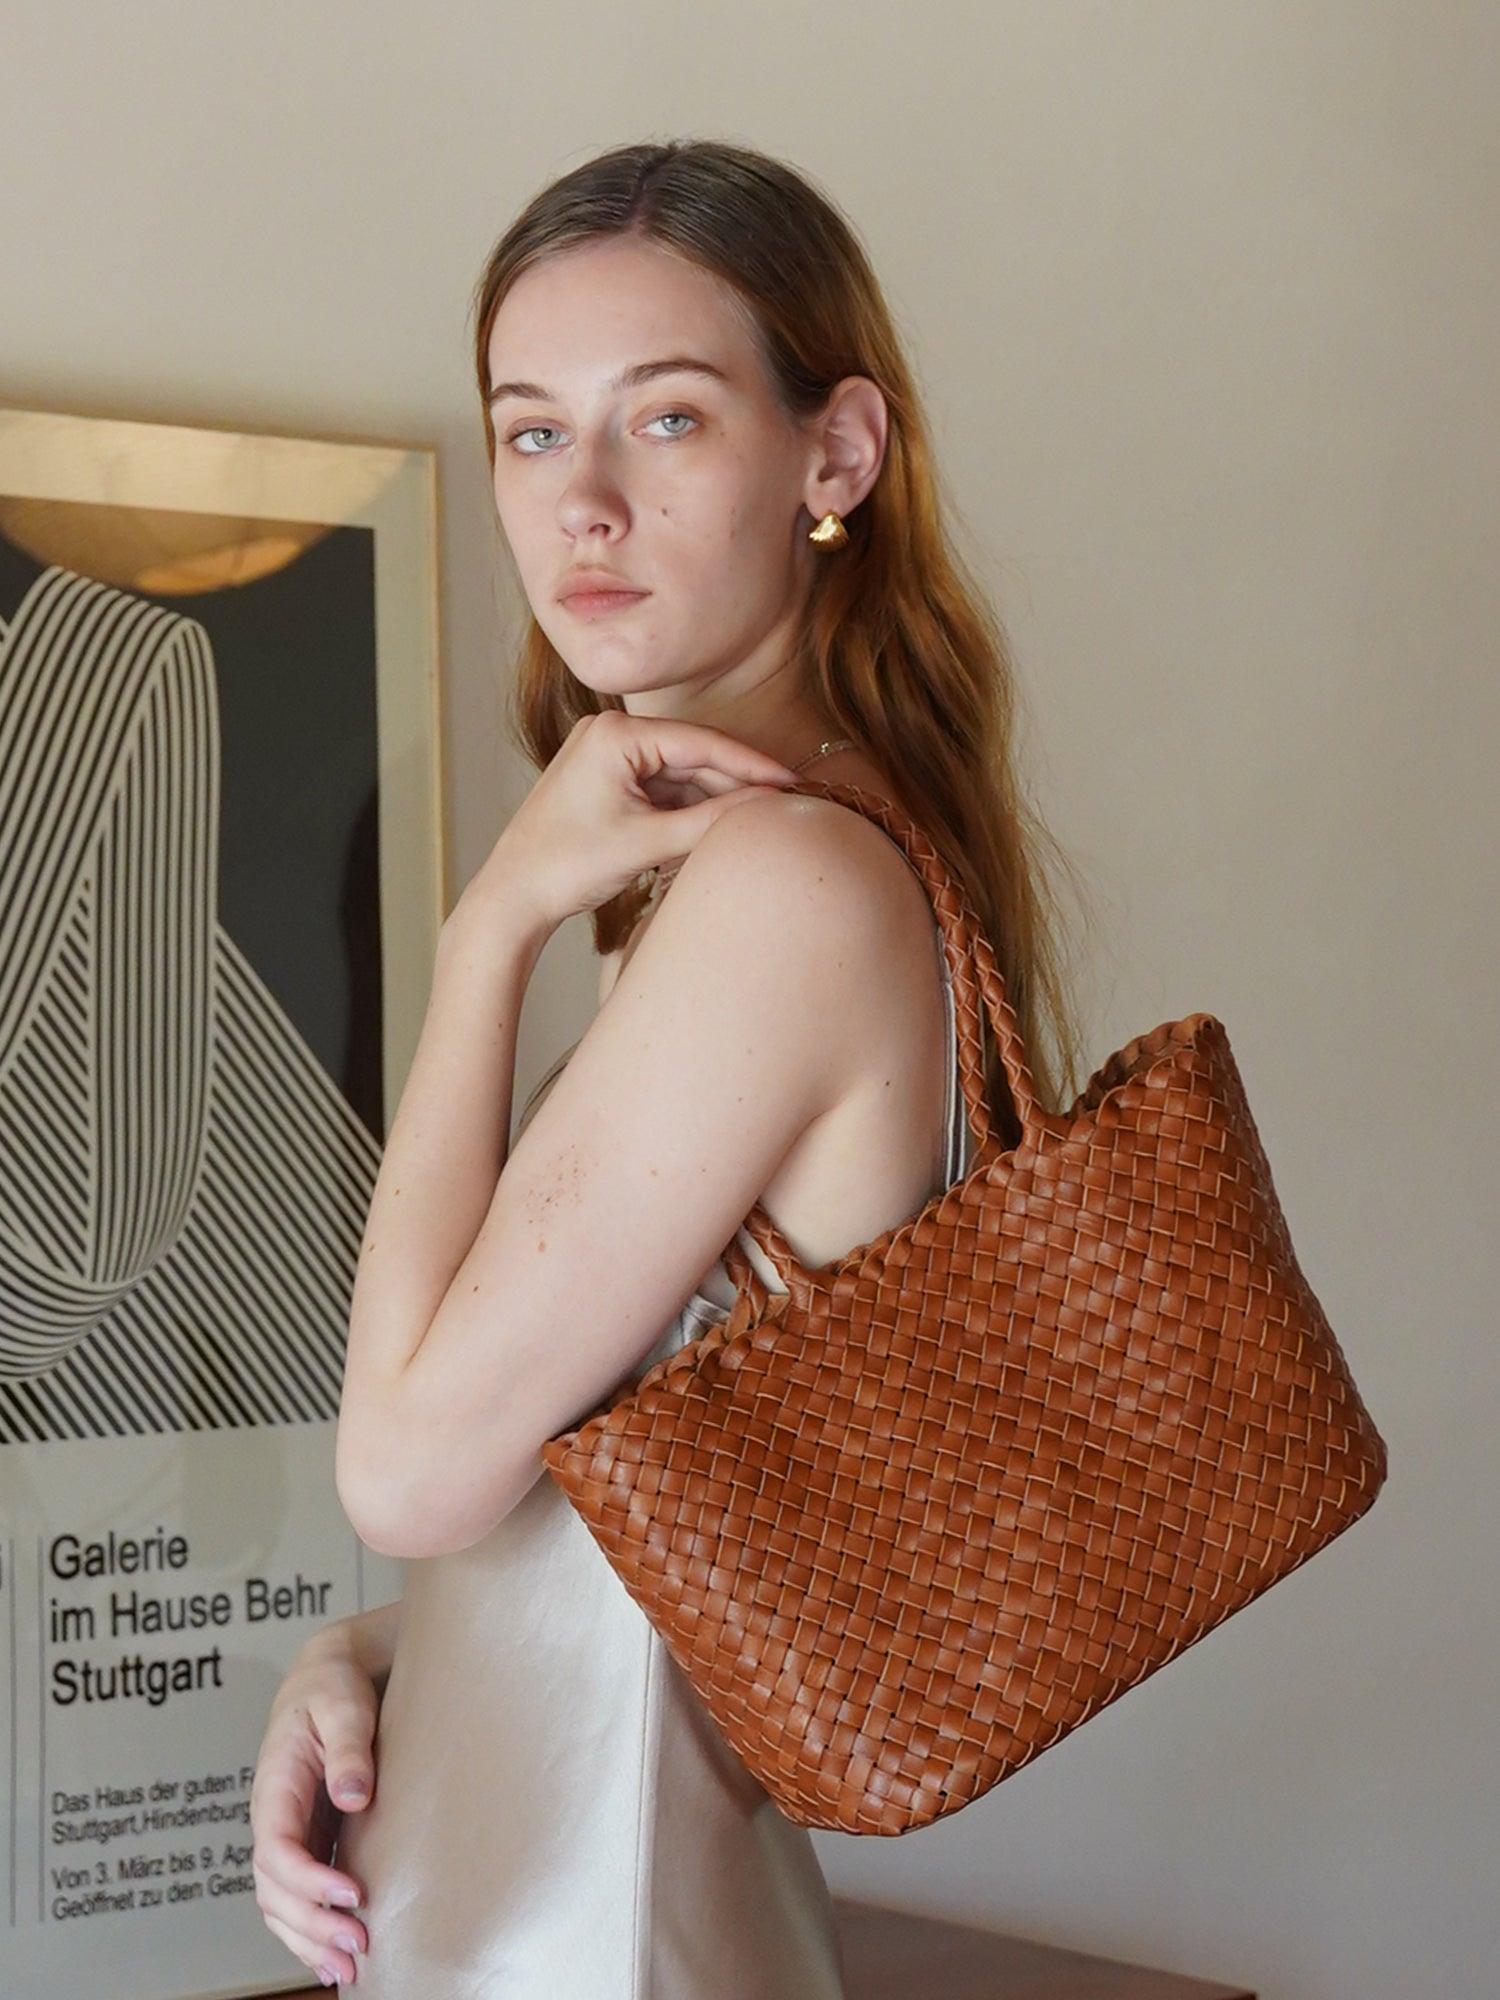 Woven leather bag, handmade full grain leather bag, Minimalist women's Bag, Handbag, Soft Leather Tote, Daily Bag, Gift for Her - Alexel Crafts